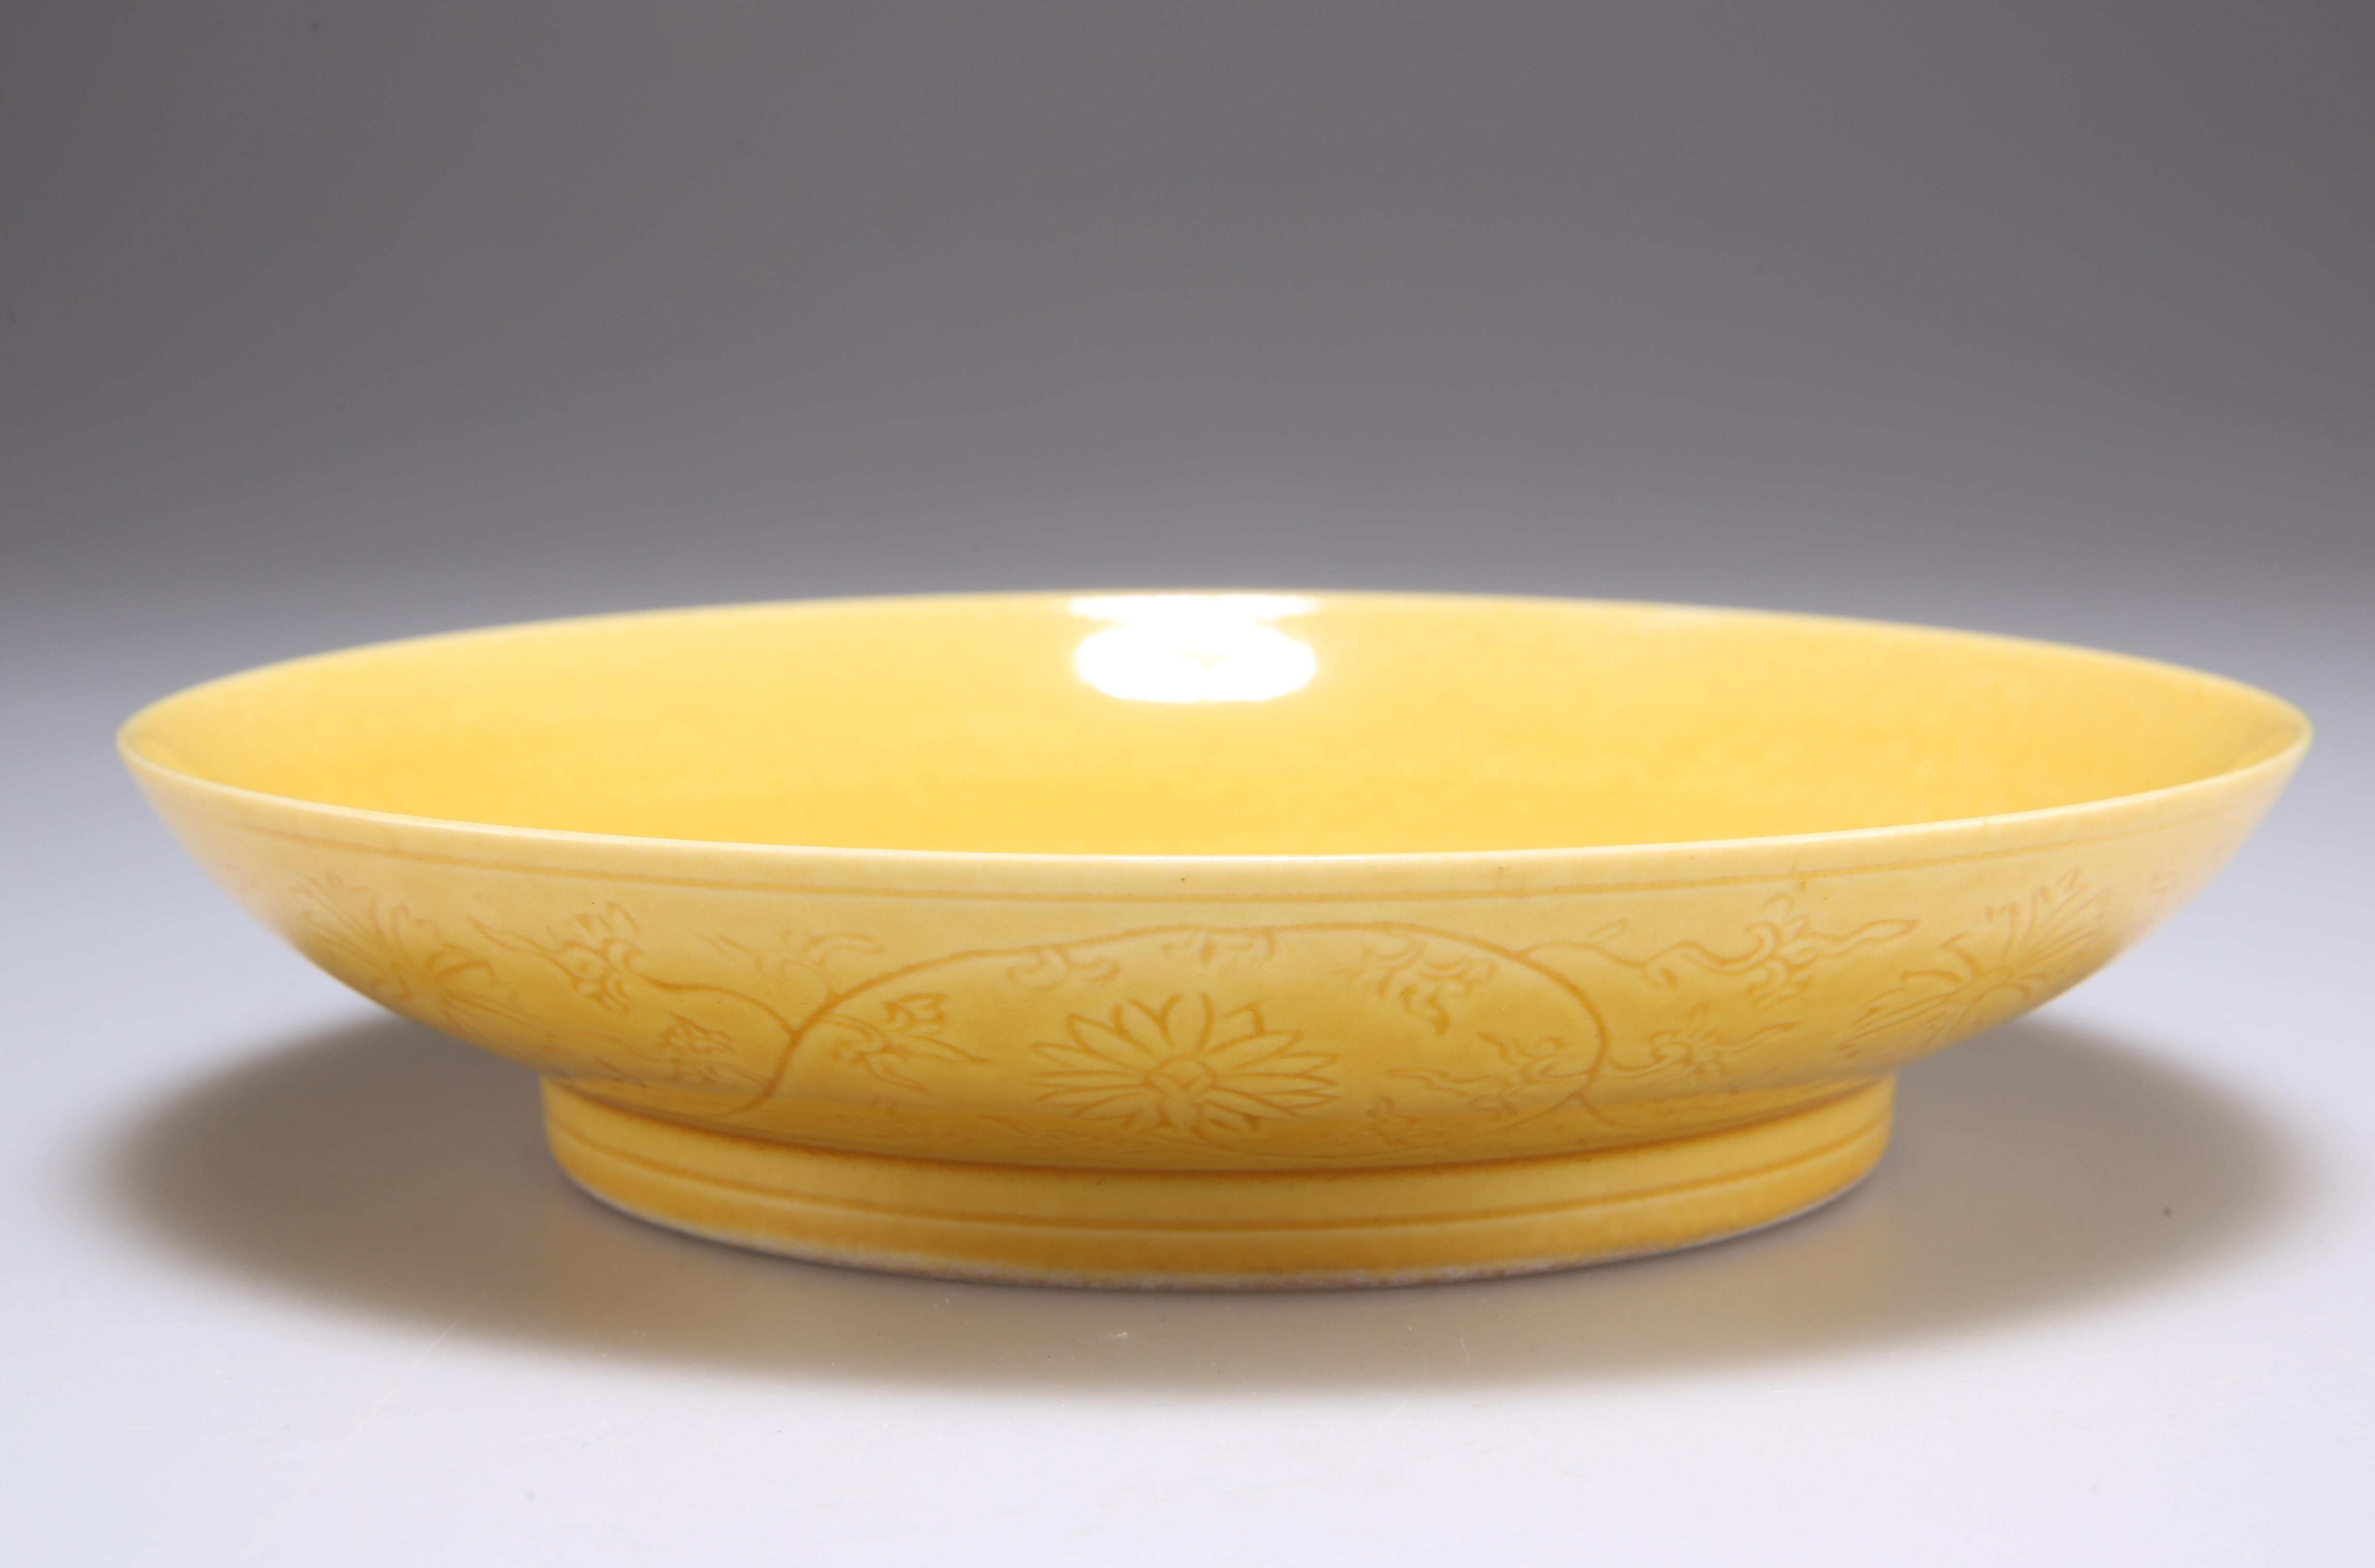 A CHINESE YELLOW-GLAZED PORCELAIN SAUCER DISH